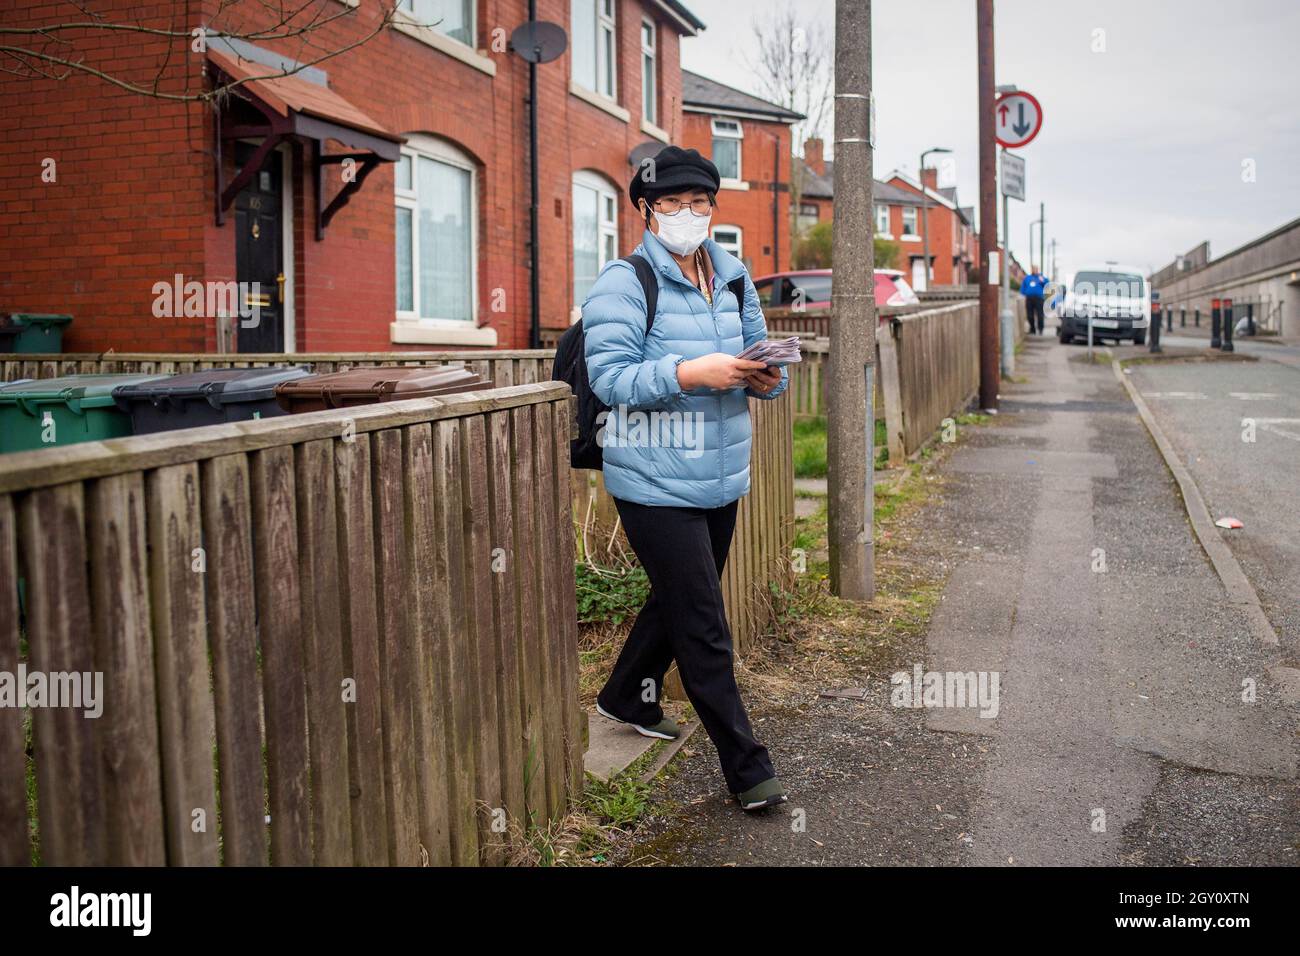 Jihyun Park, a North Korean defector who is standing as a Conservative Party MP for Bury, delivers campaign literature to local residents in Bury, Lancashire, UK Stock Photo